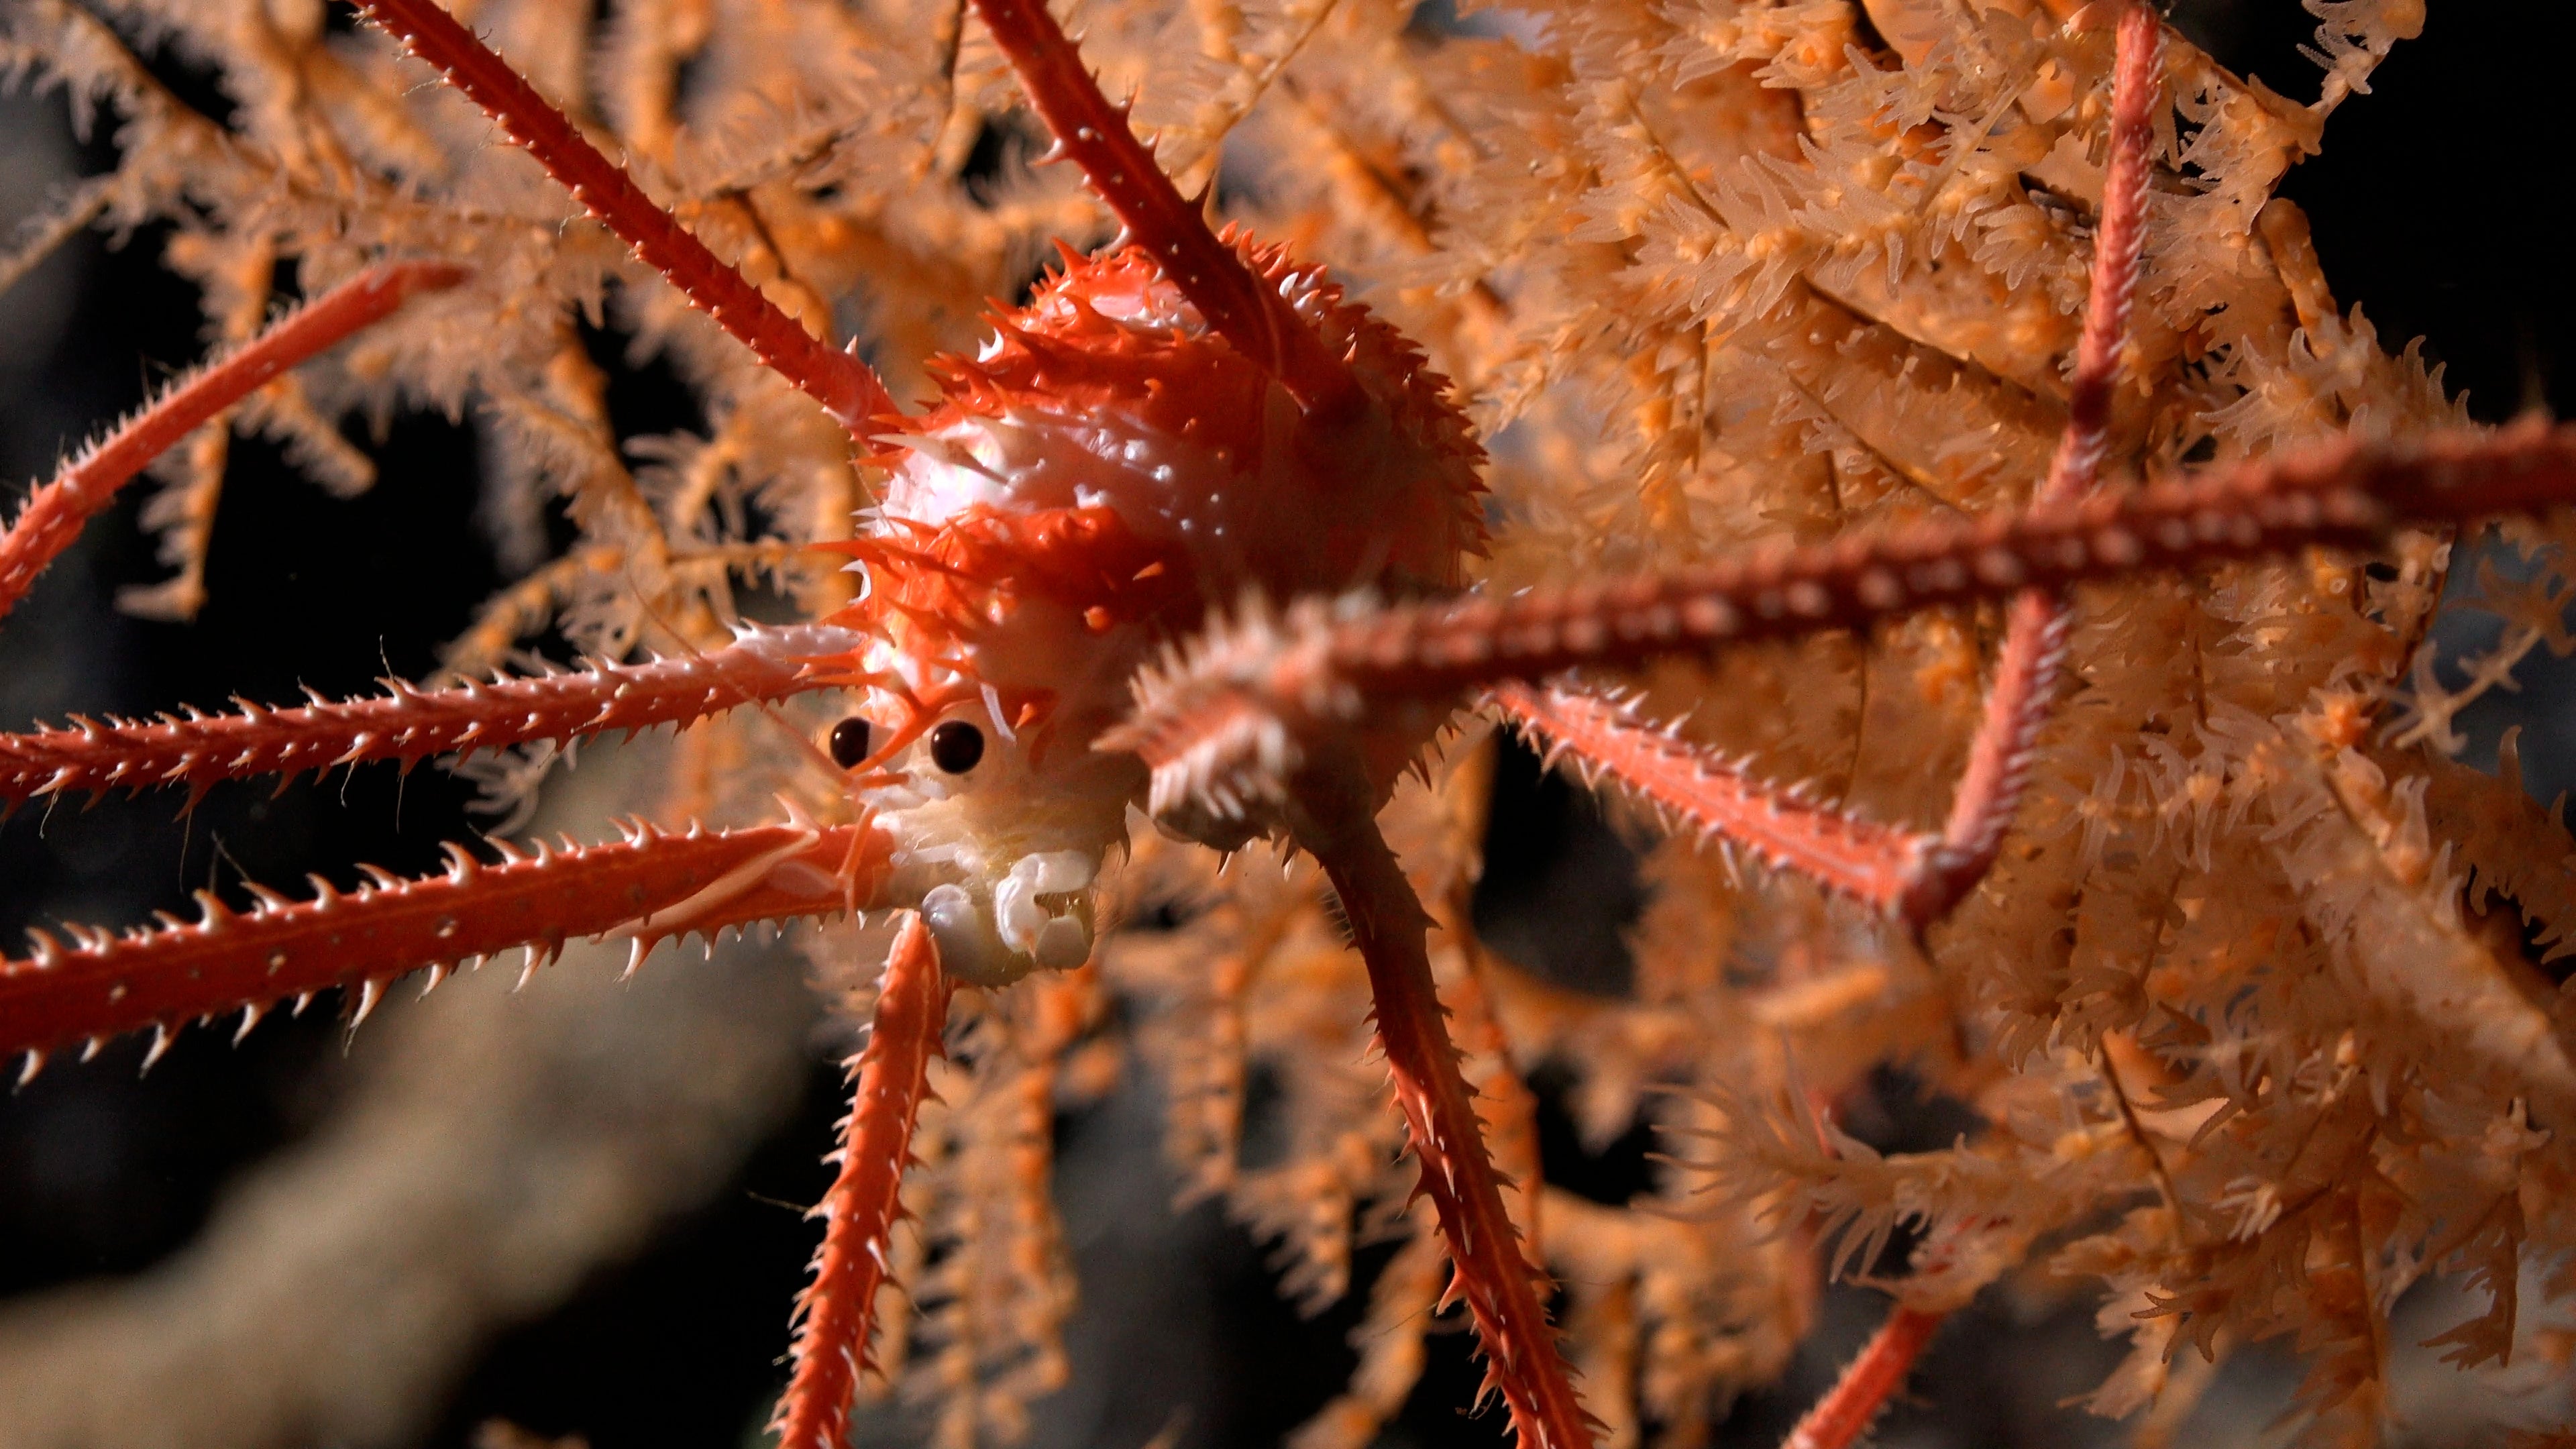 Over 100 new species were found living on an underwater mountain near Chile